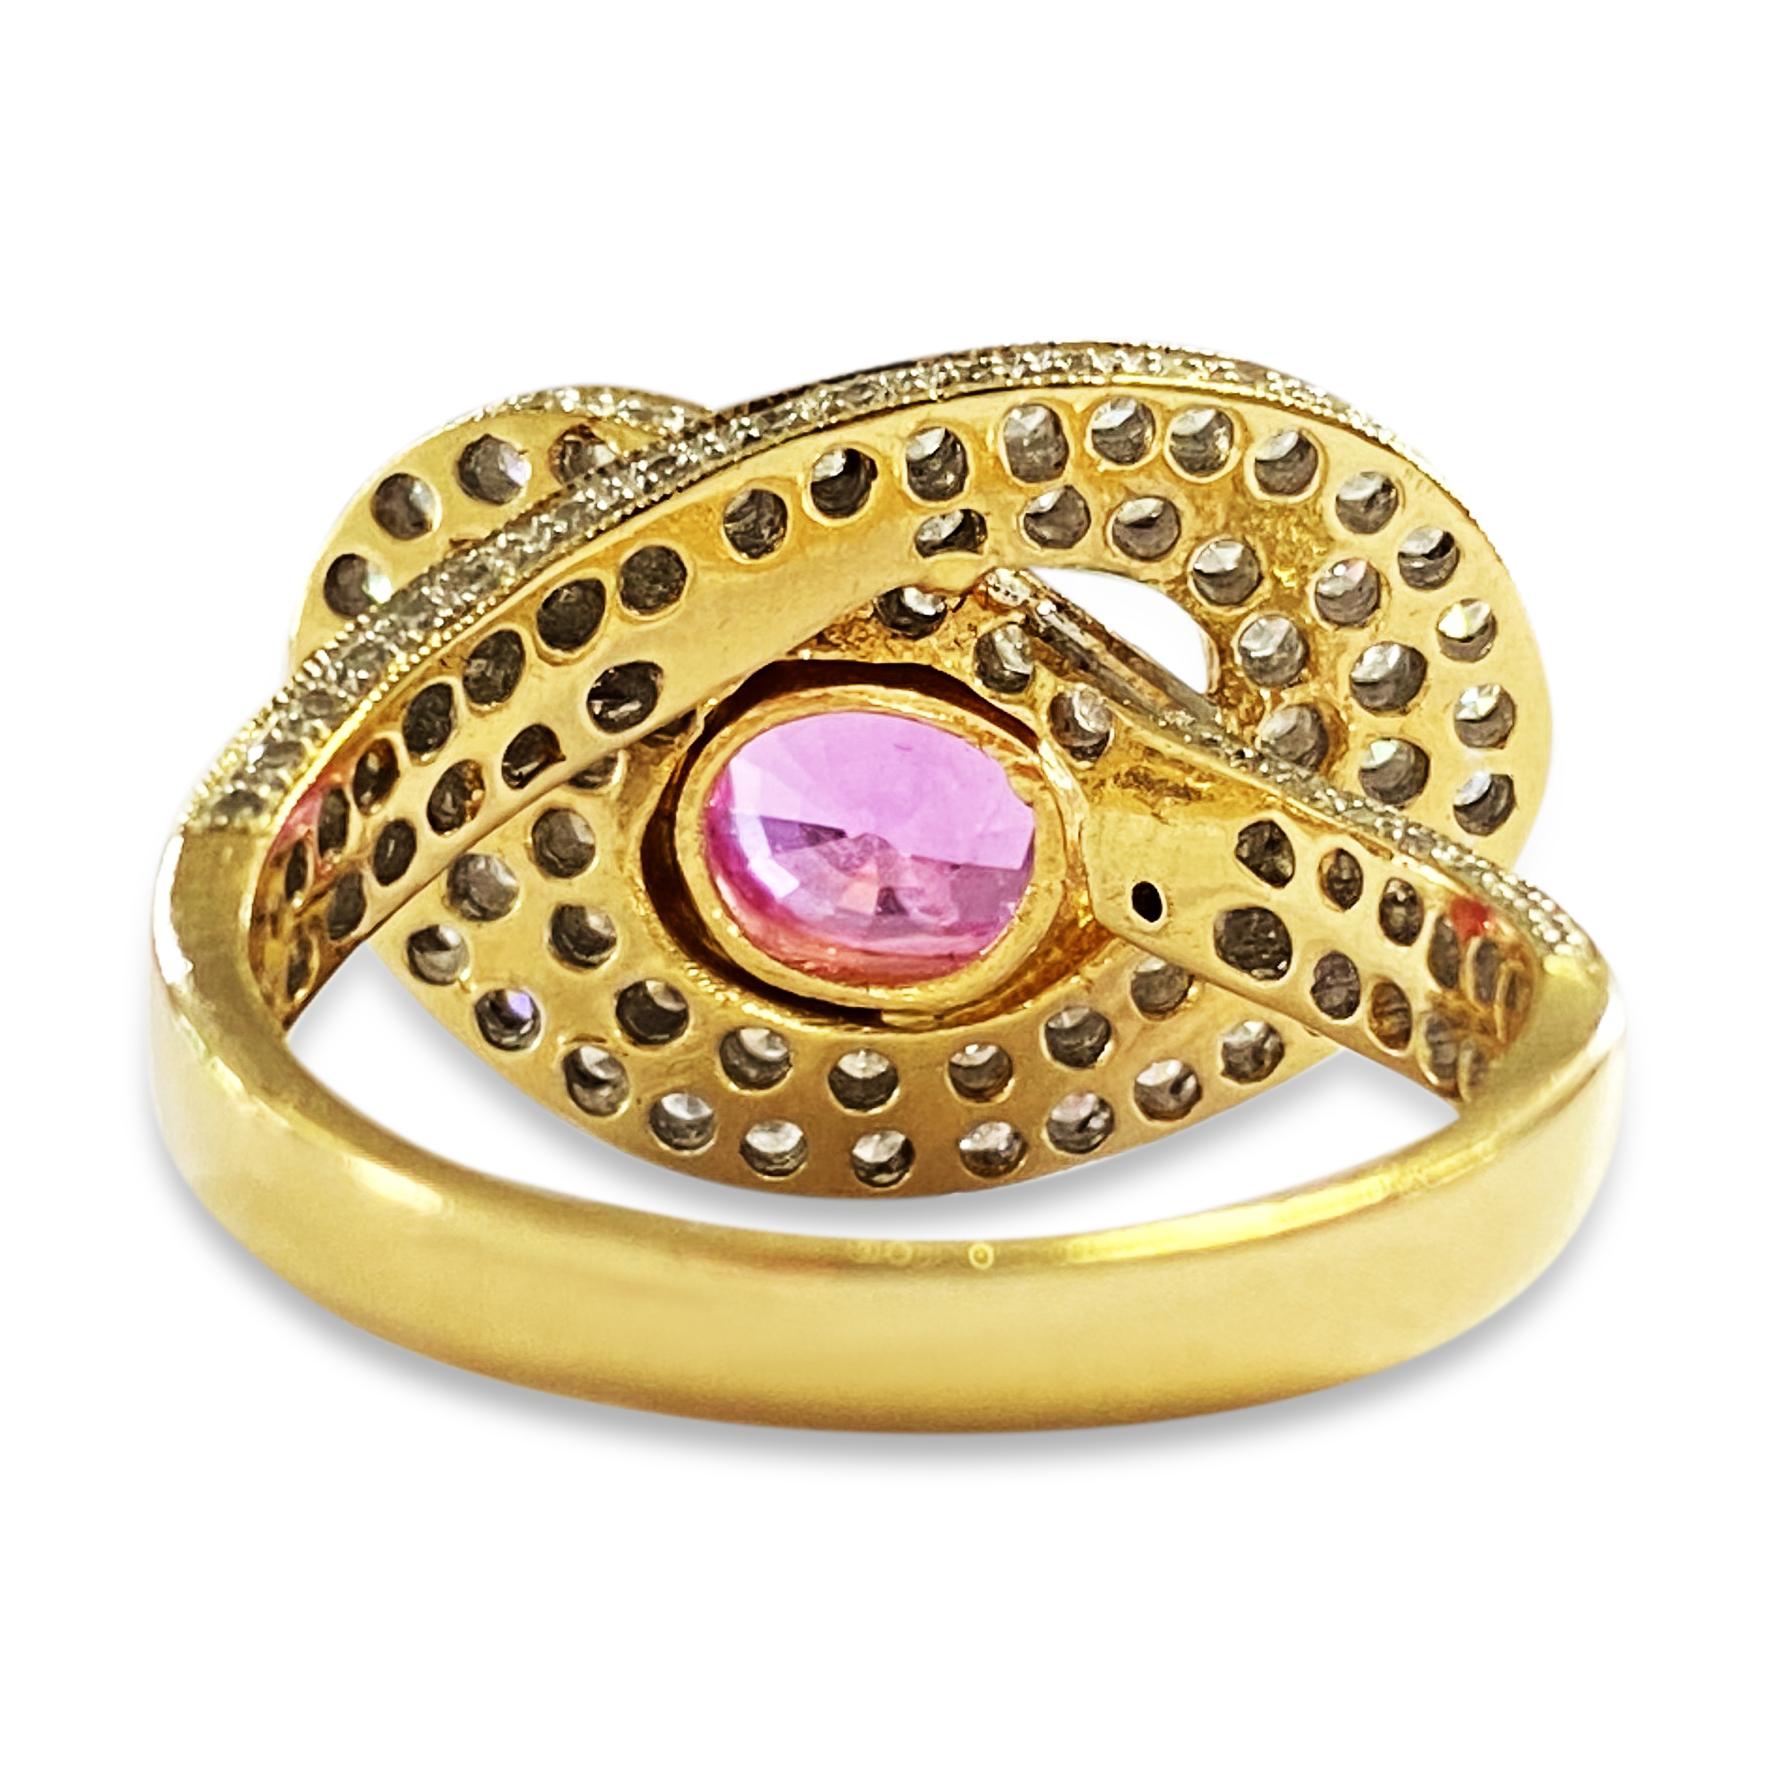 3.00 Carat Diamond Pink Sapphire Fancy Womens Ring 18 Karat Yellow Gold In Excellent Condition For Sale In Miami, FL